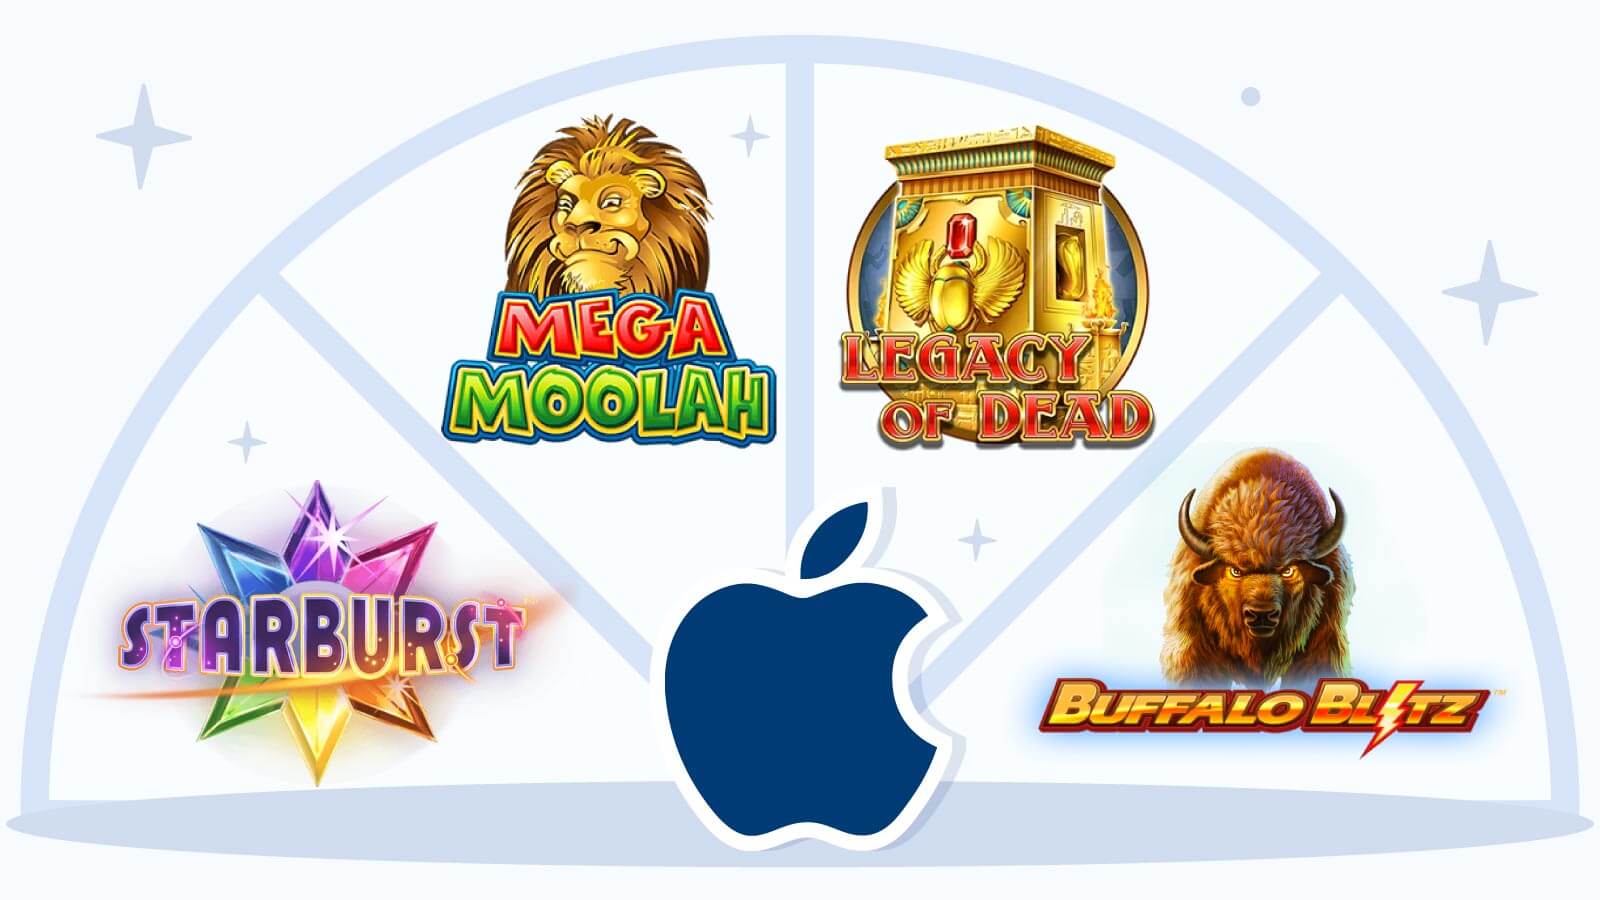 Great Slots and Online Casino Games Optimized for iPhone